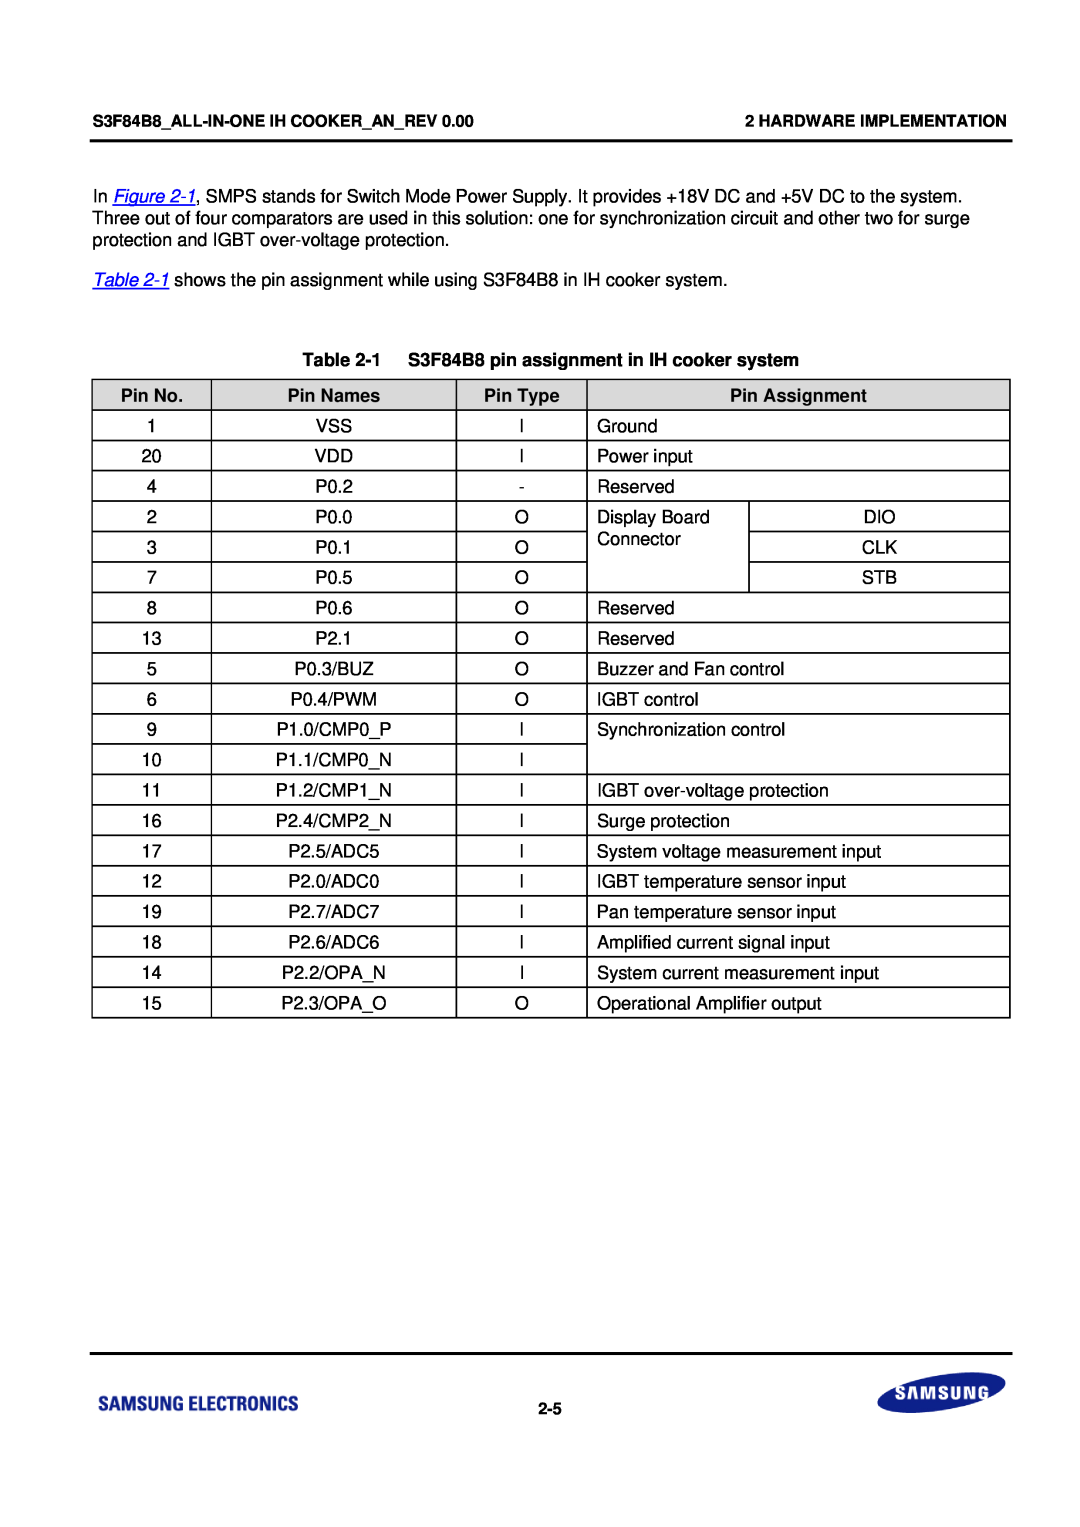 Samsung manual 1 S3F84B8 pin assignment in IH cooker system, Pin No, Pin Names, Pin Type, Pin Assignment 